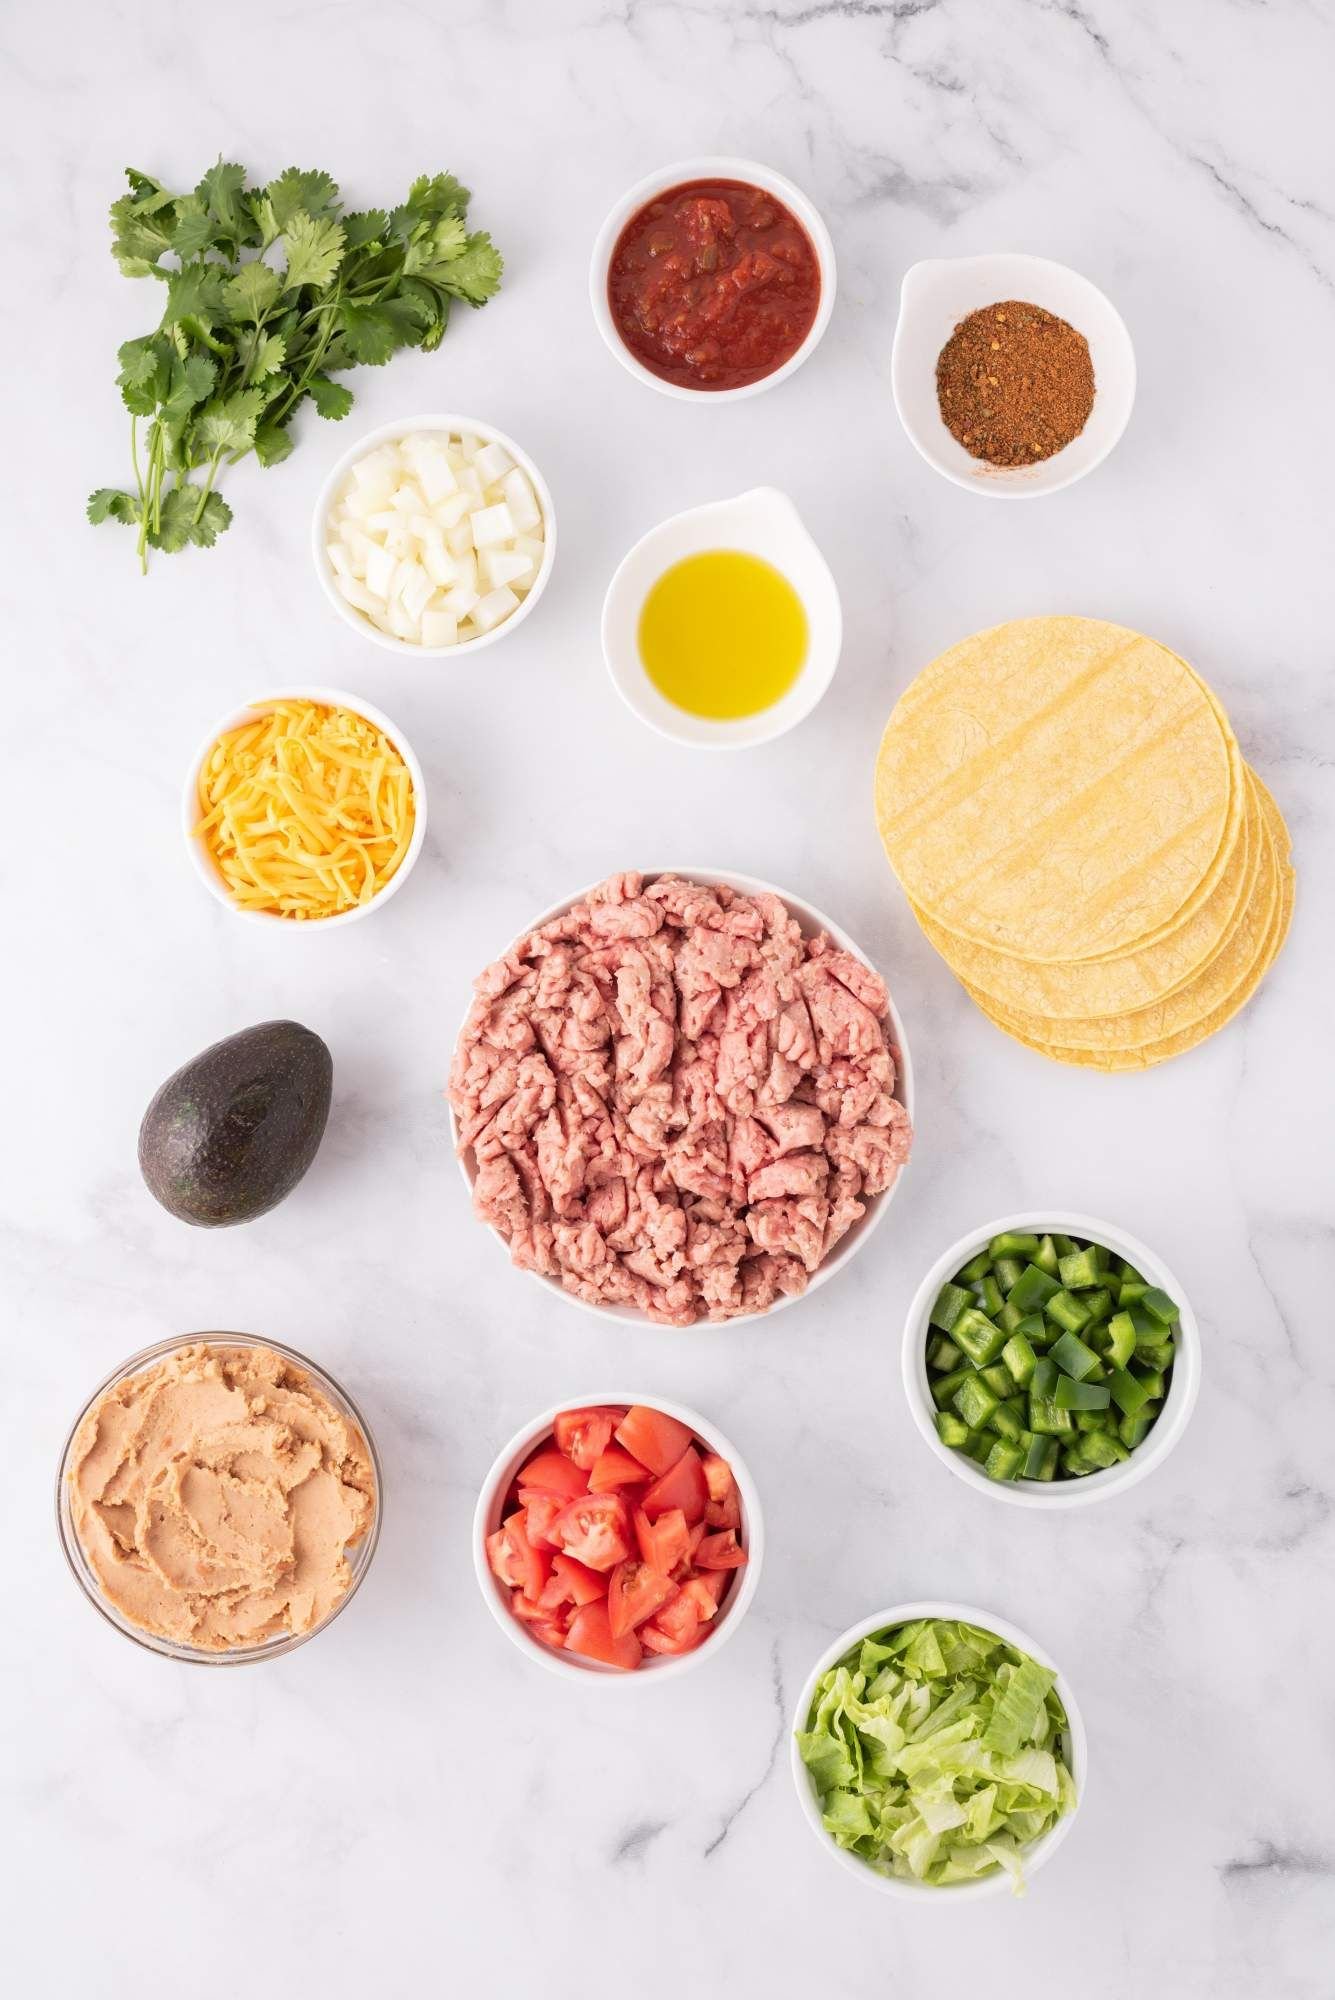 Ingredients for ground turkey tostadas including cilantro, salsa, taco seasoning, beans, cheese, and more.